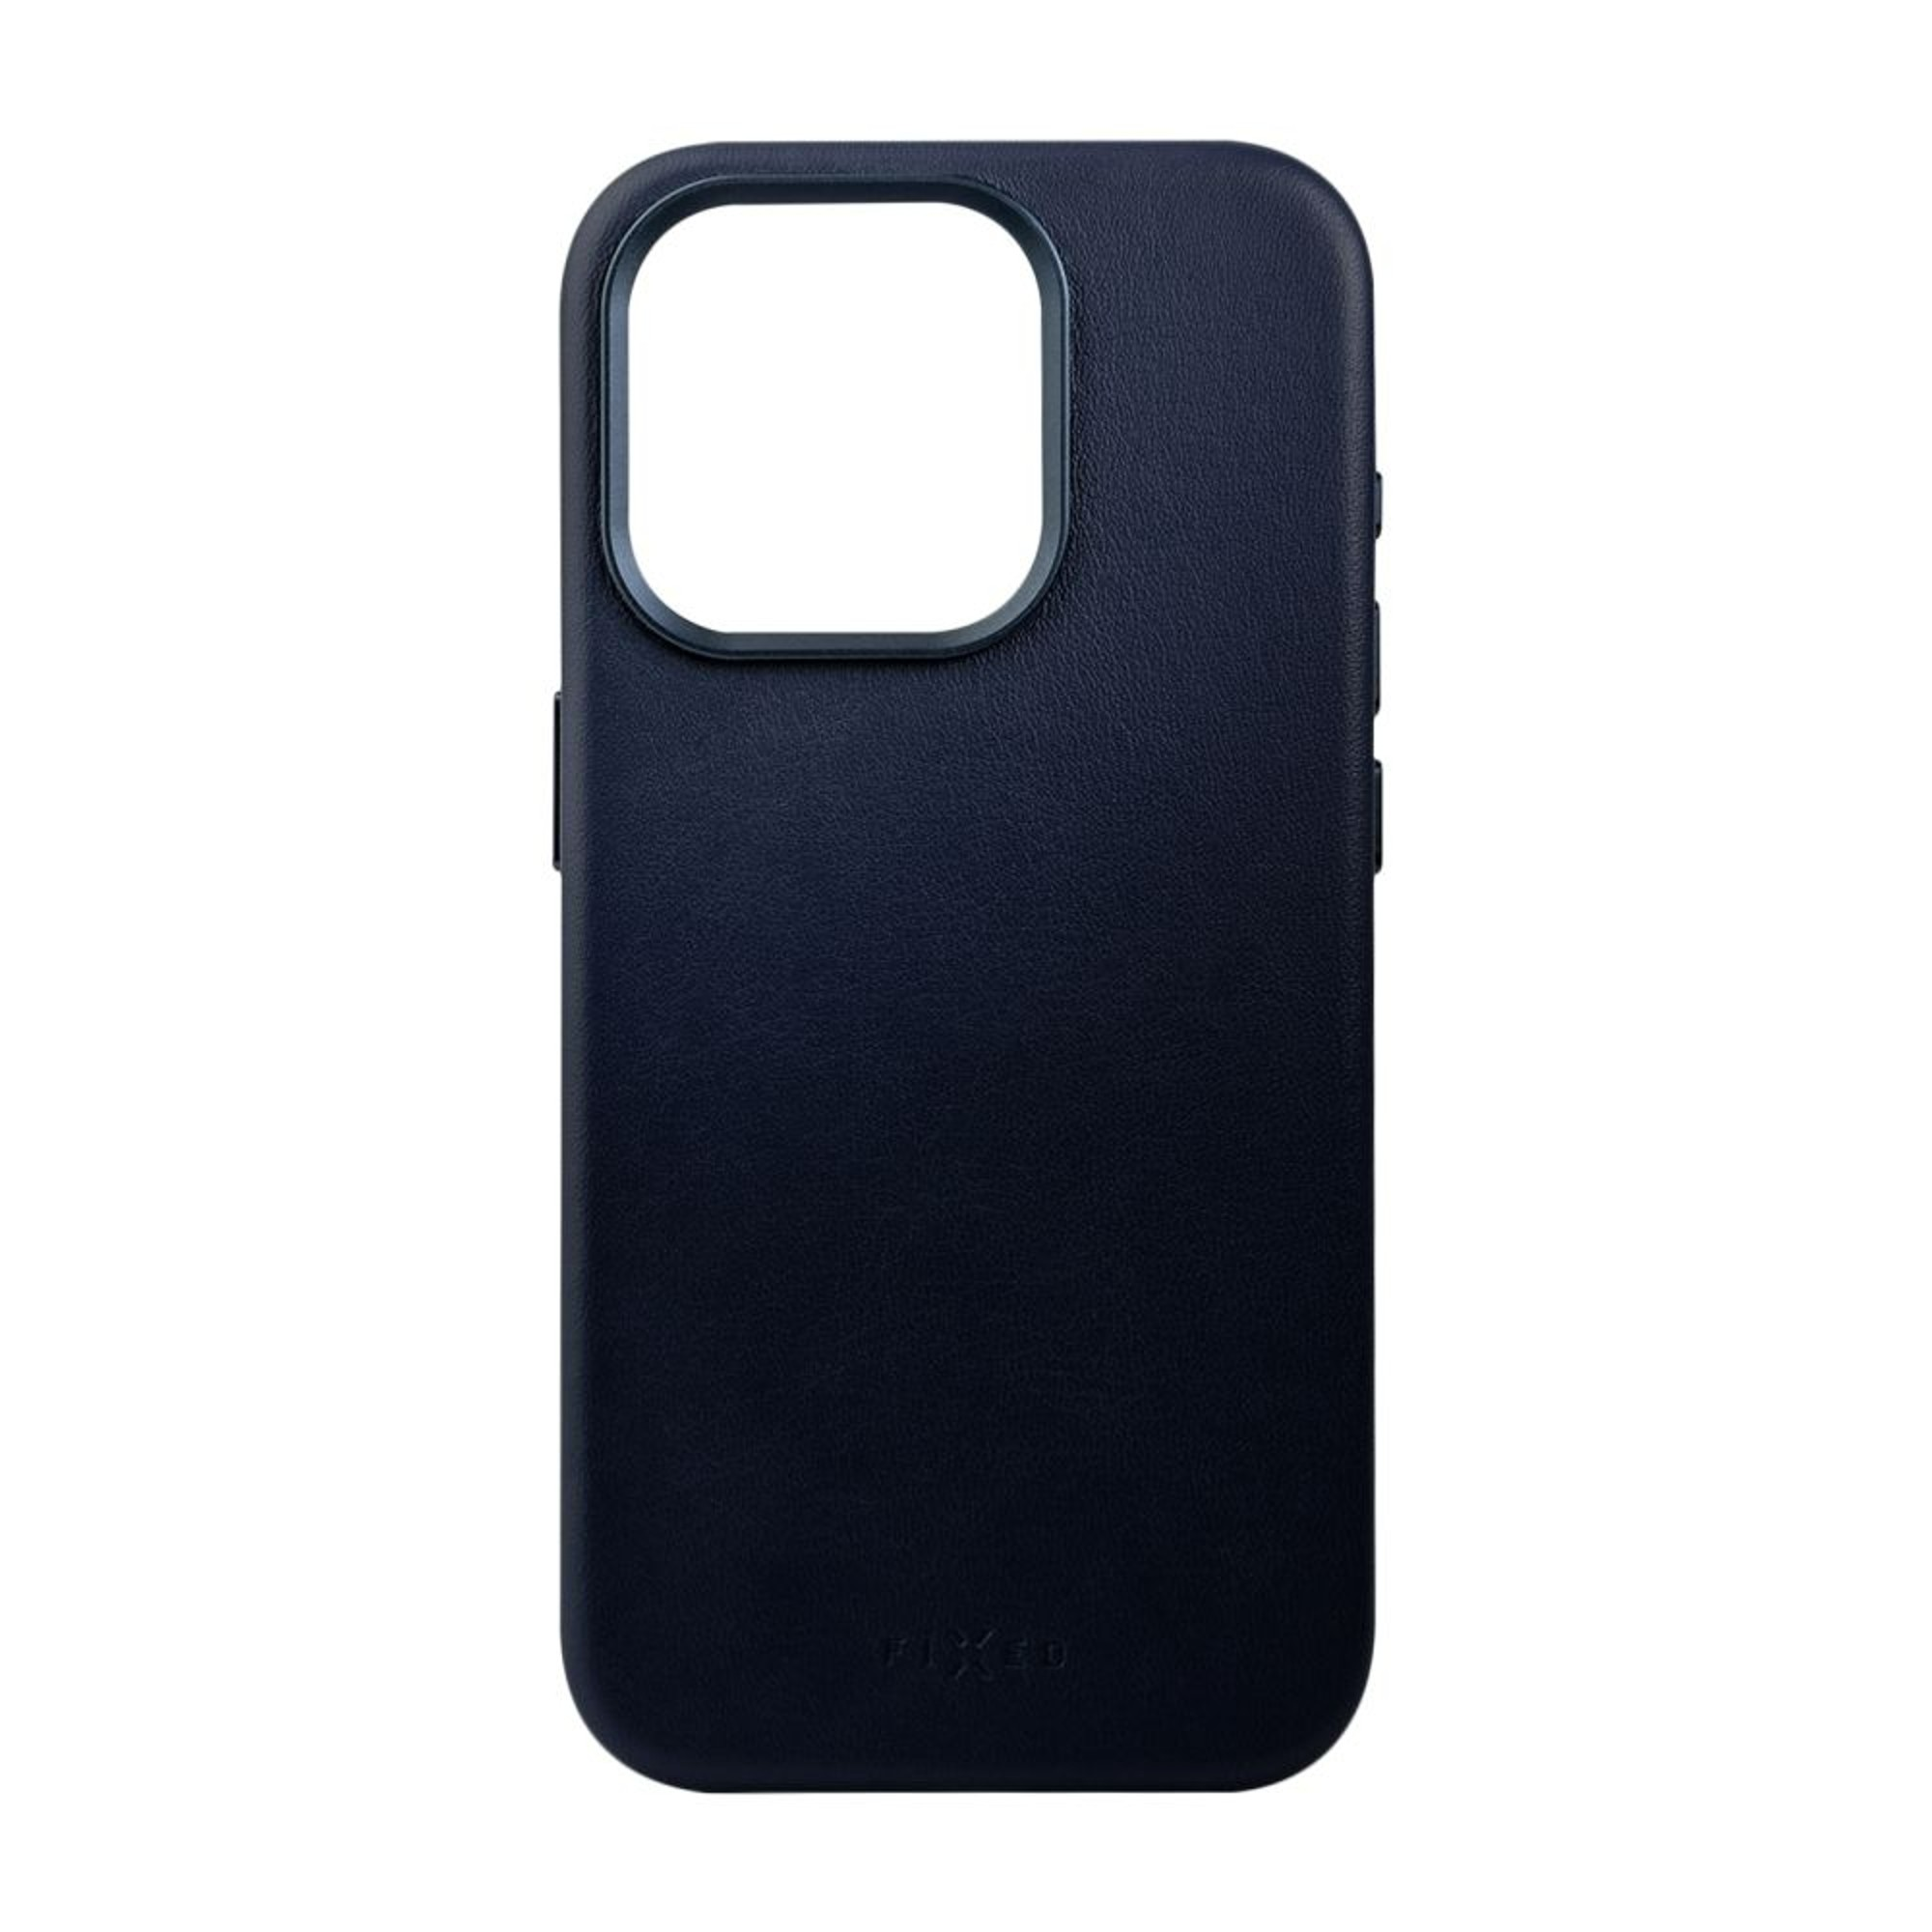 iPhone FIXLM-1202-BL, MagLeather Apple, Blau Pro, FIXED Backcover, 15